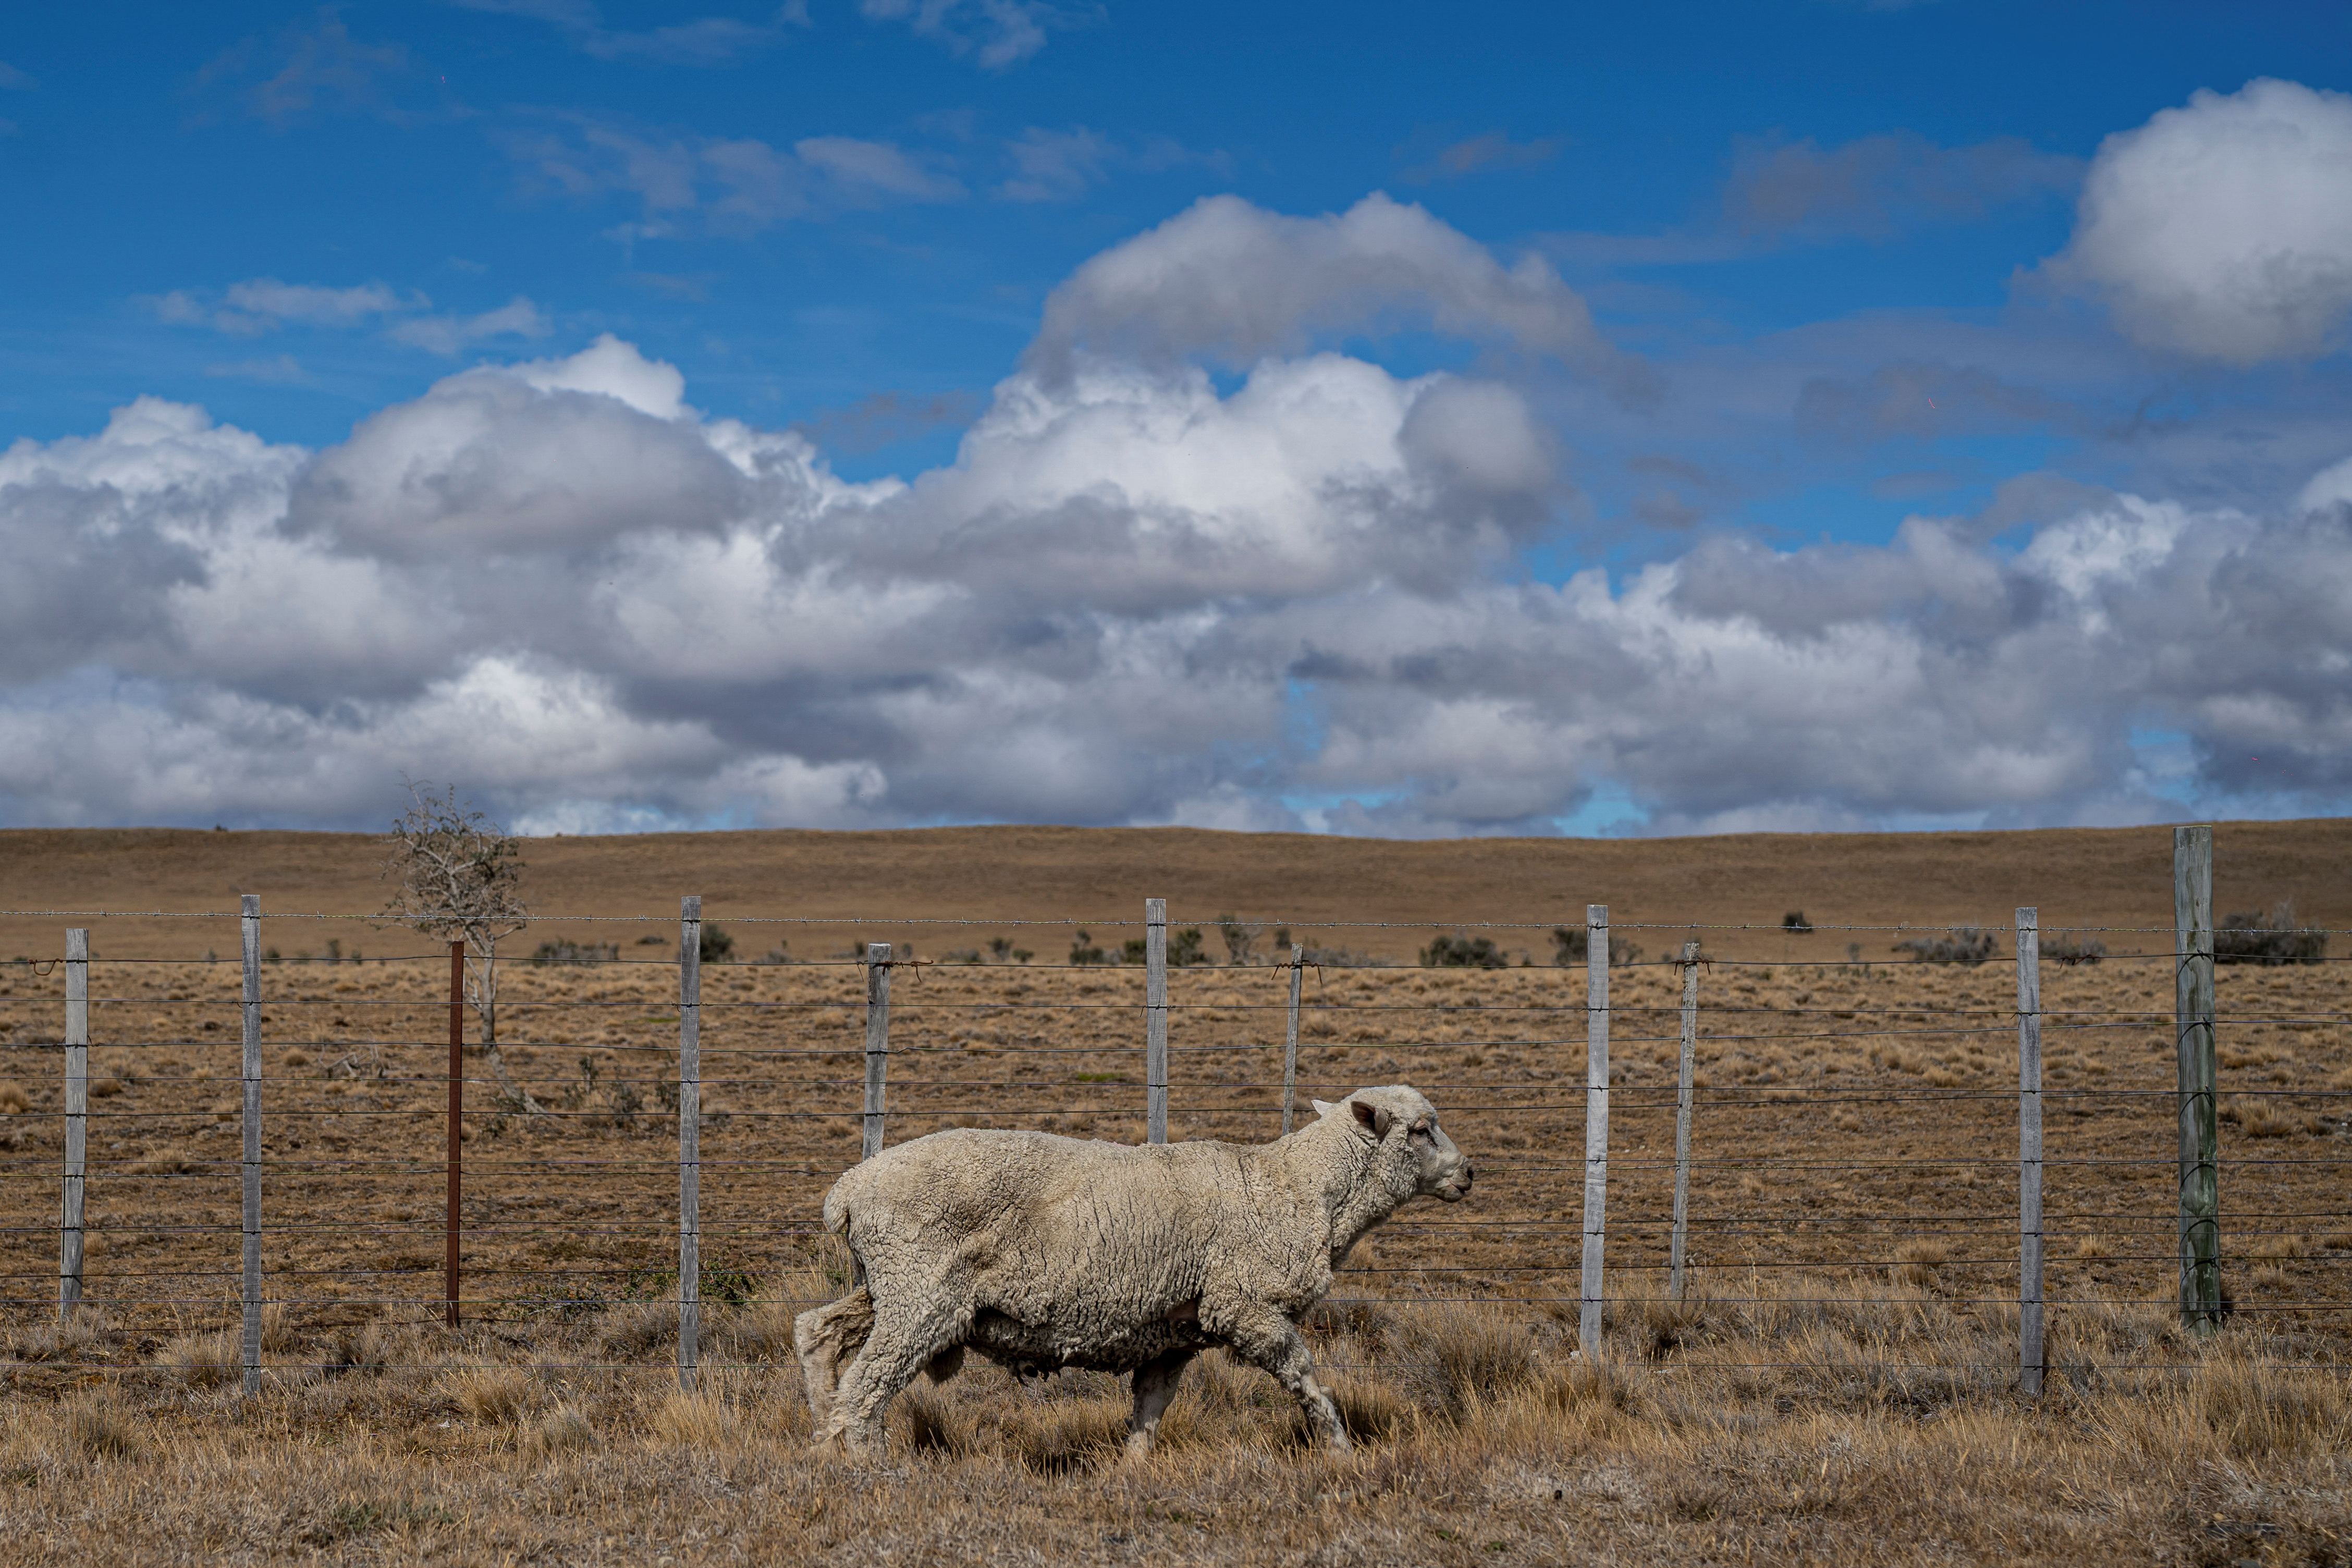 A sheep walks inside a fenced area, in Punta Arenas